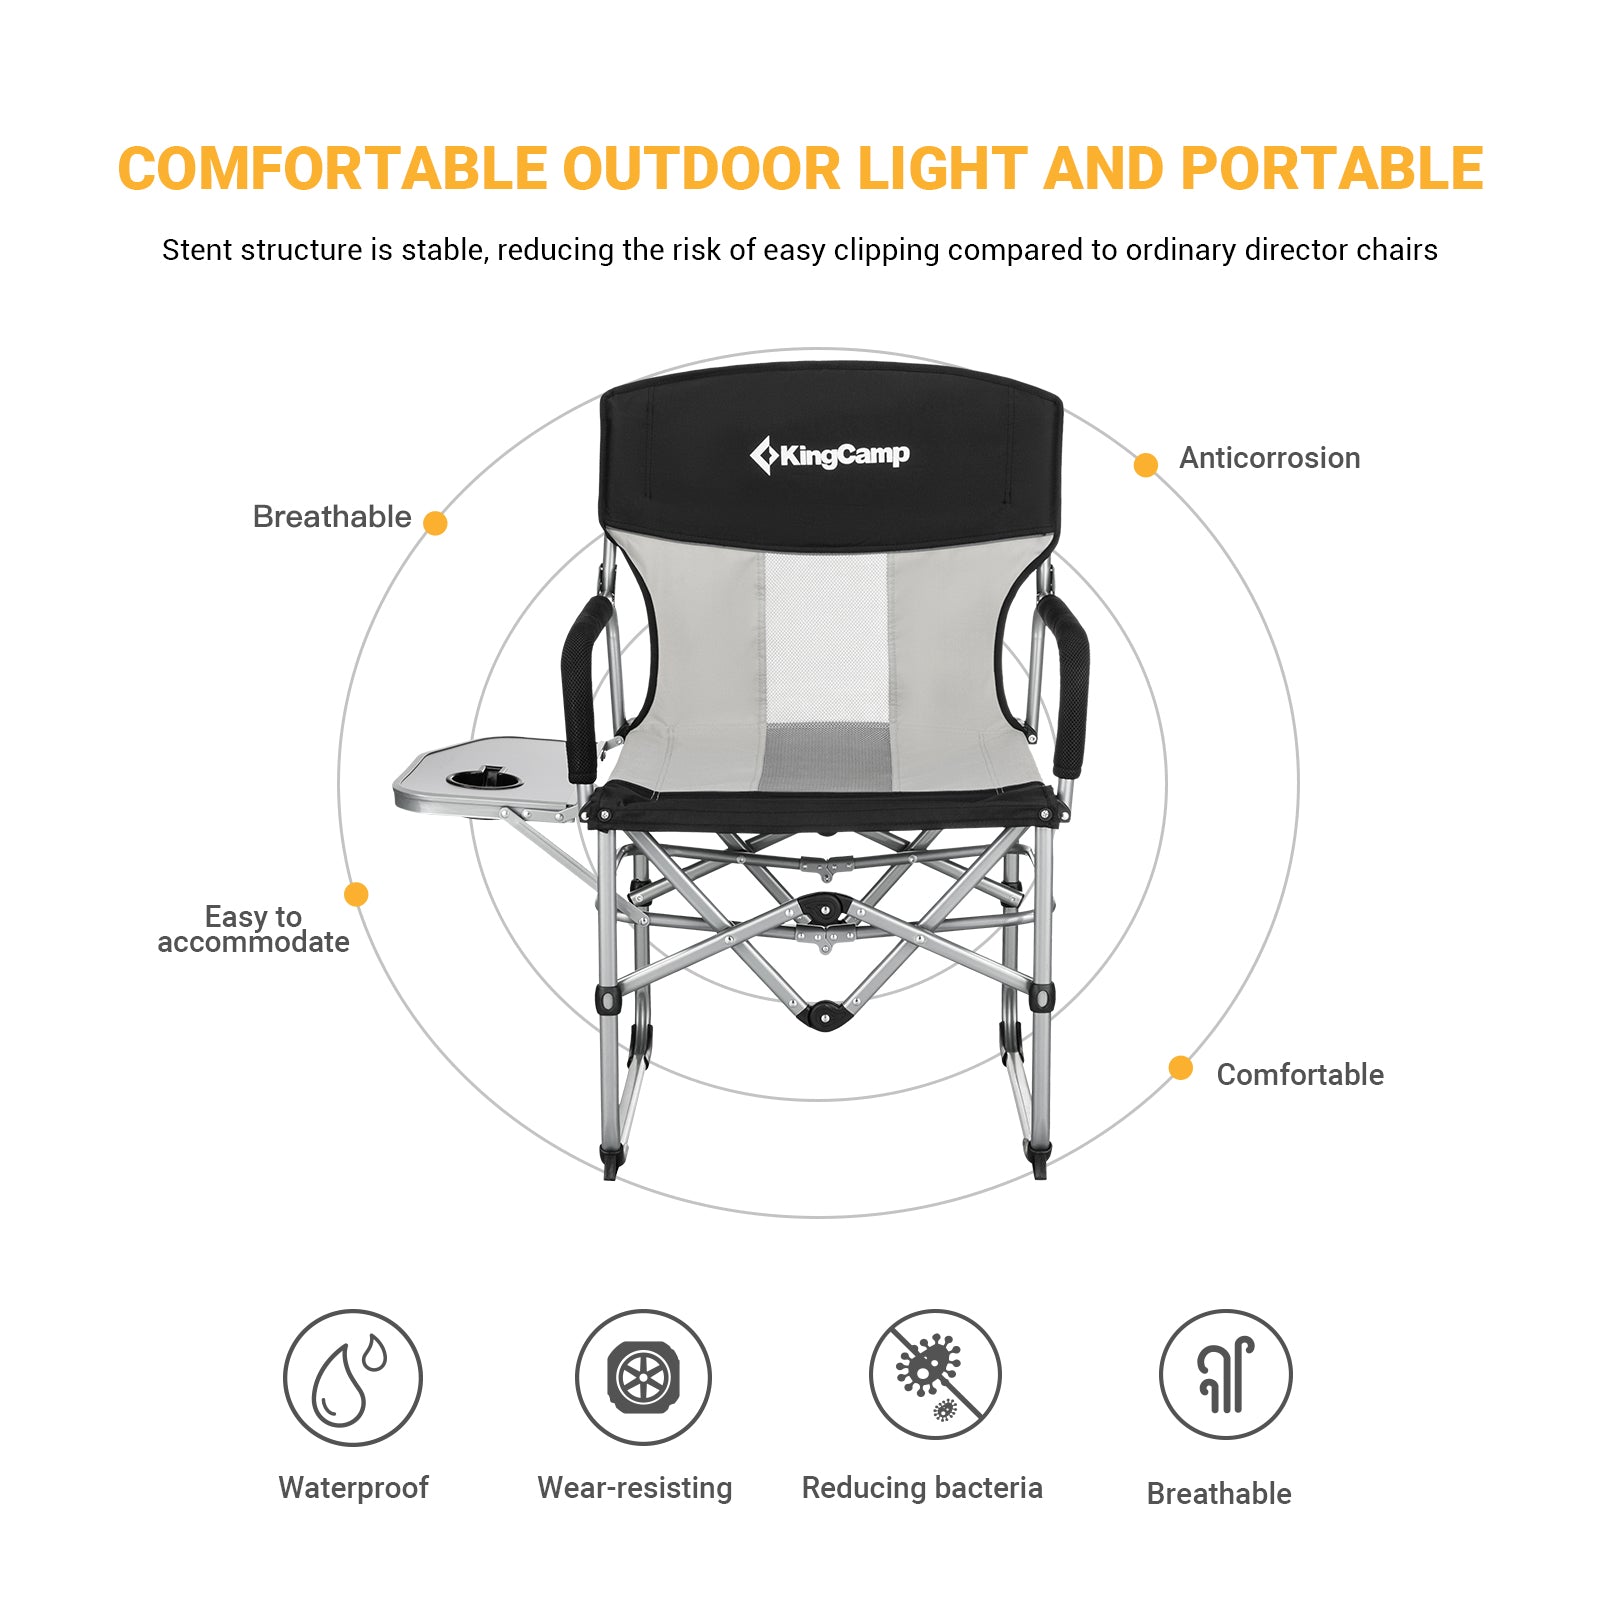 KingCamp Oversized Camping Directors Chair